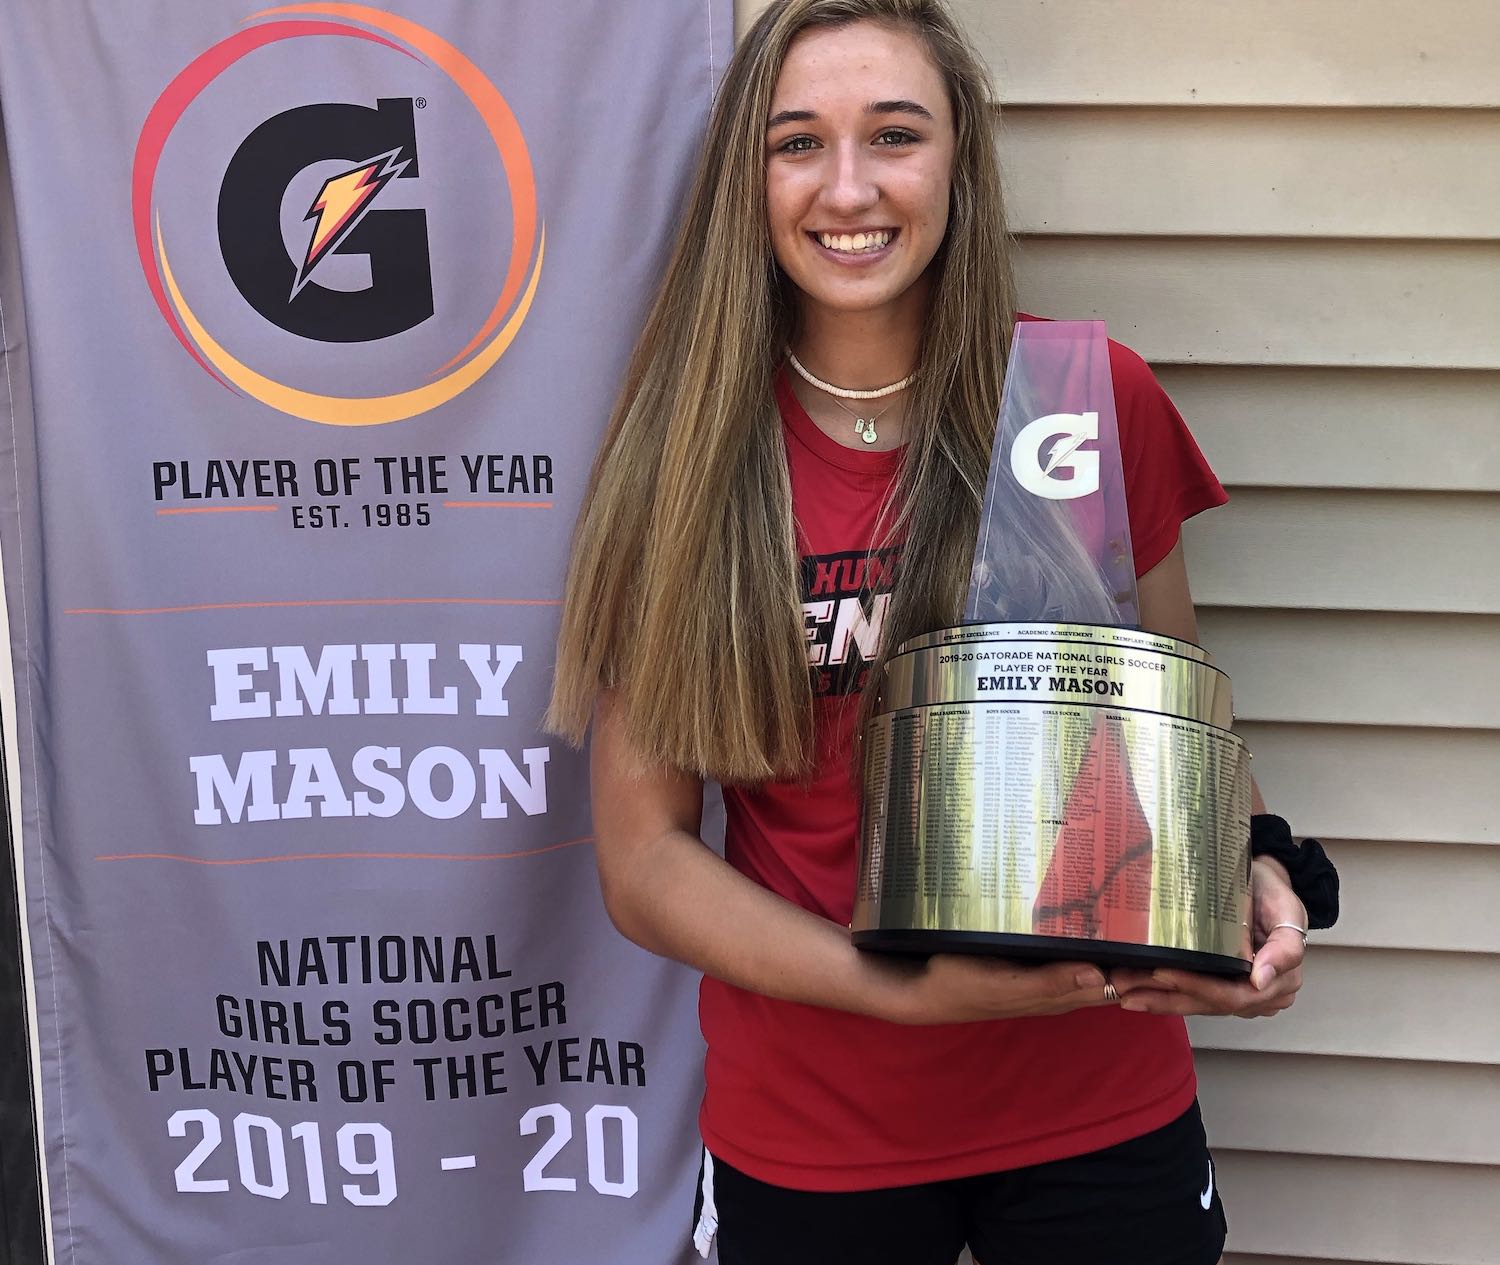 ECNL rockstar & Rutgers commit Emily Mason is the 2020 2019-20 Gatorade National Girls Soccer Player of the Year